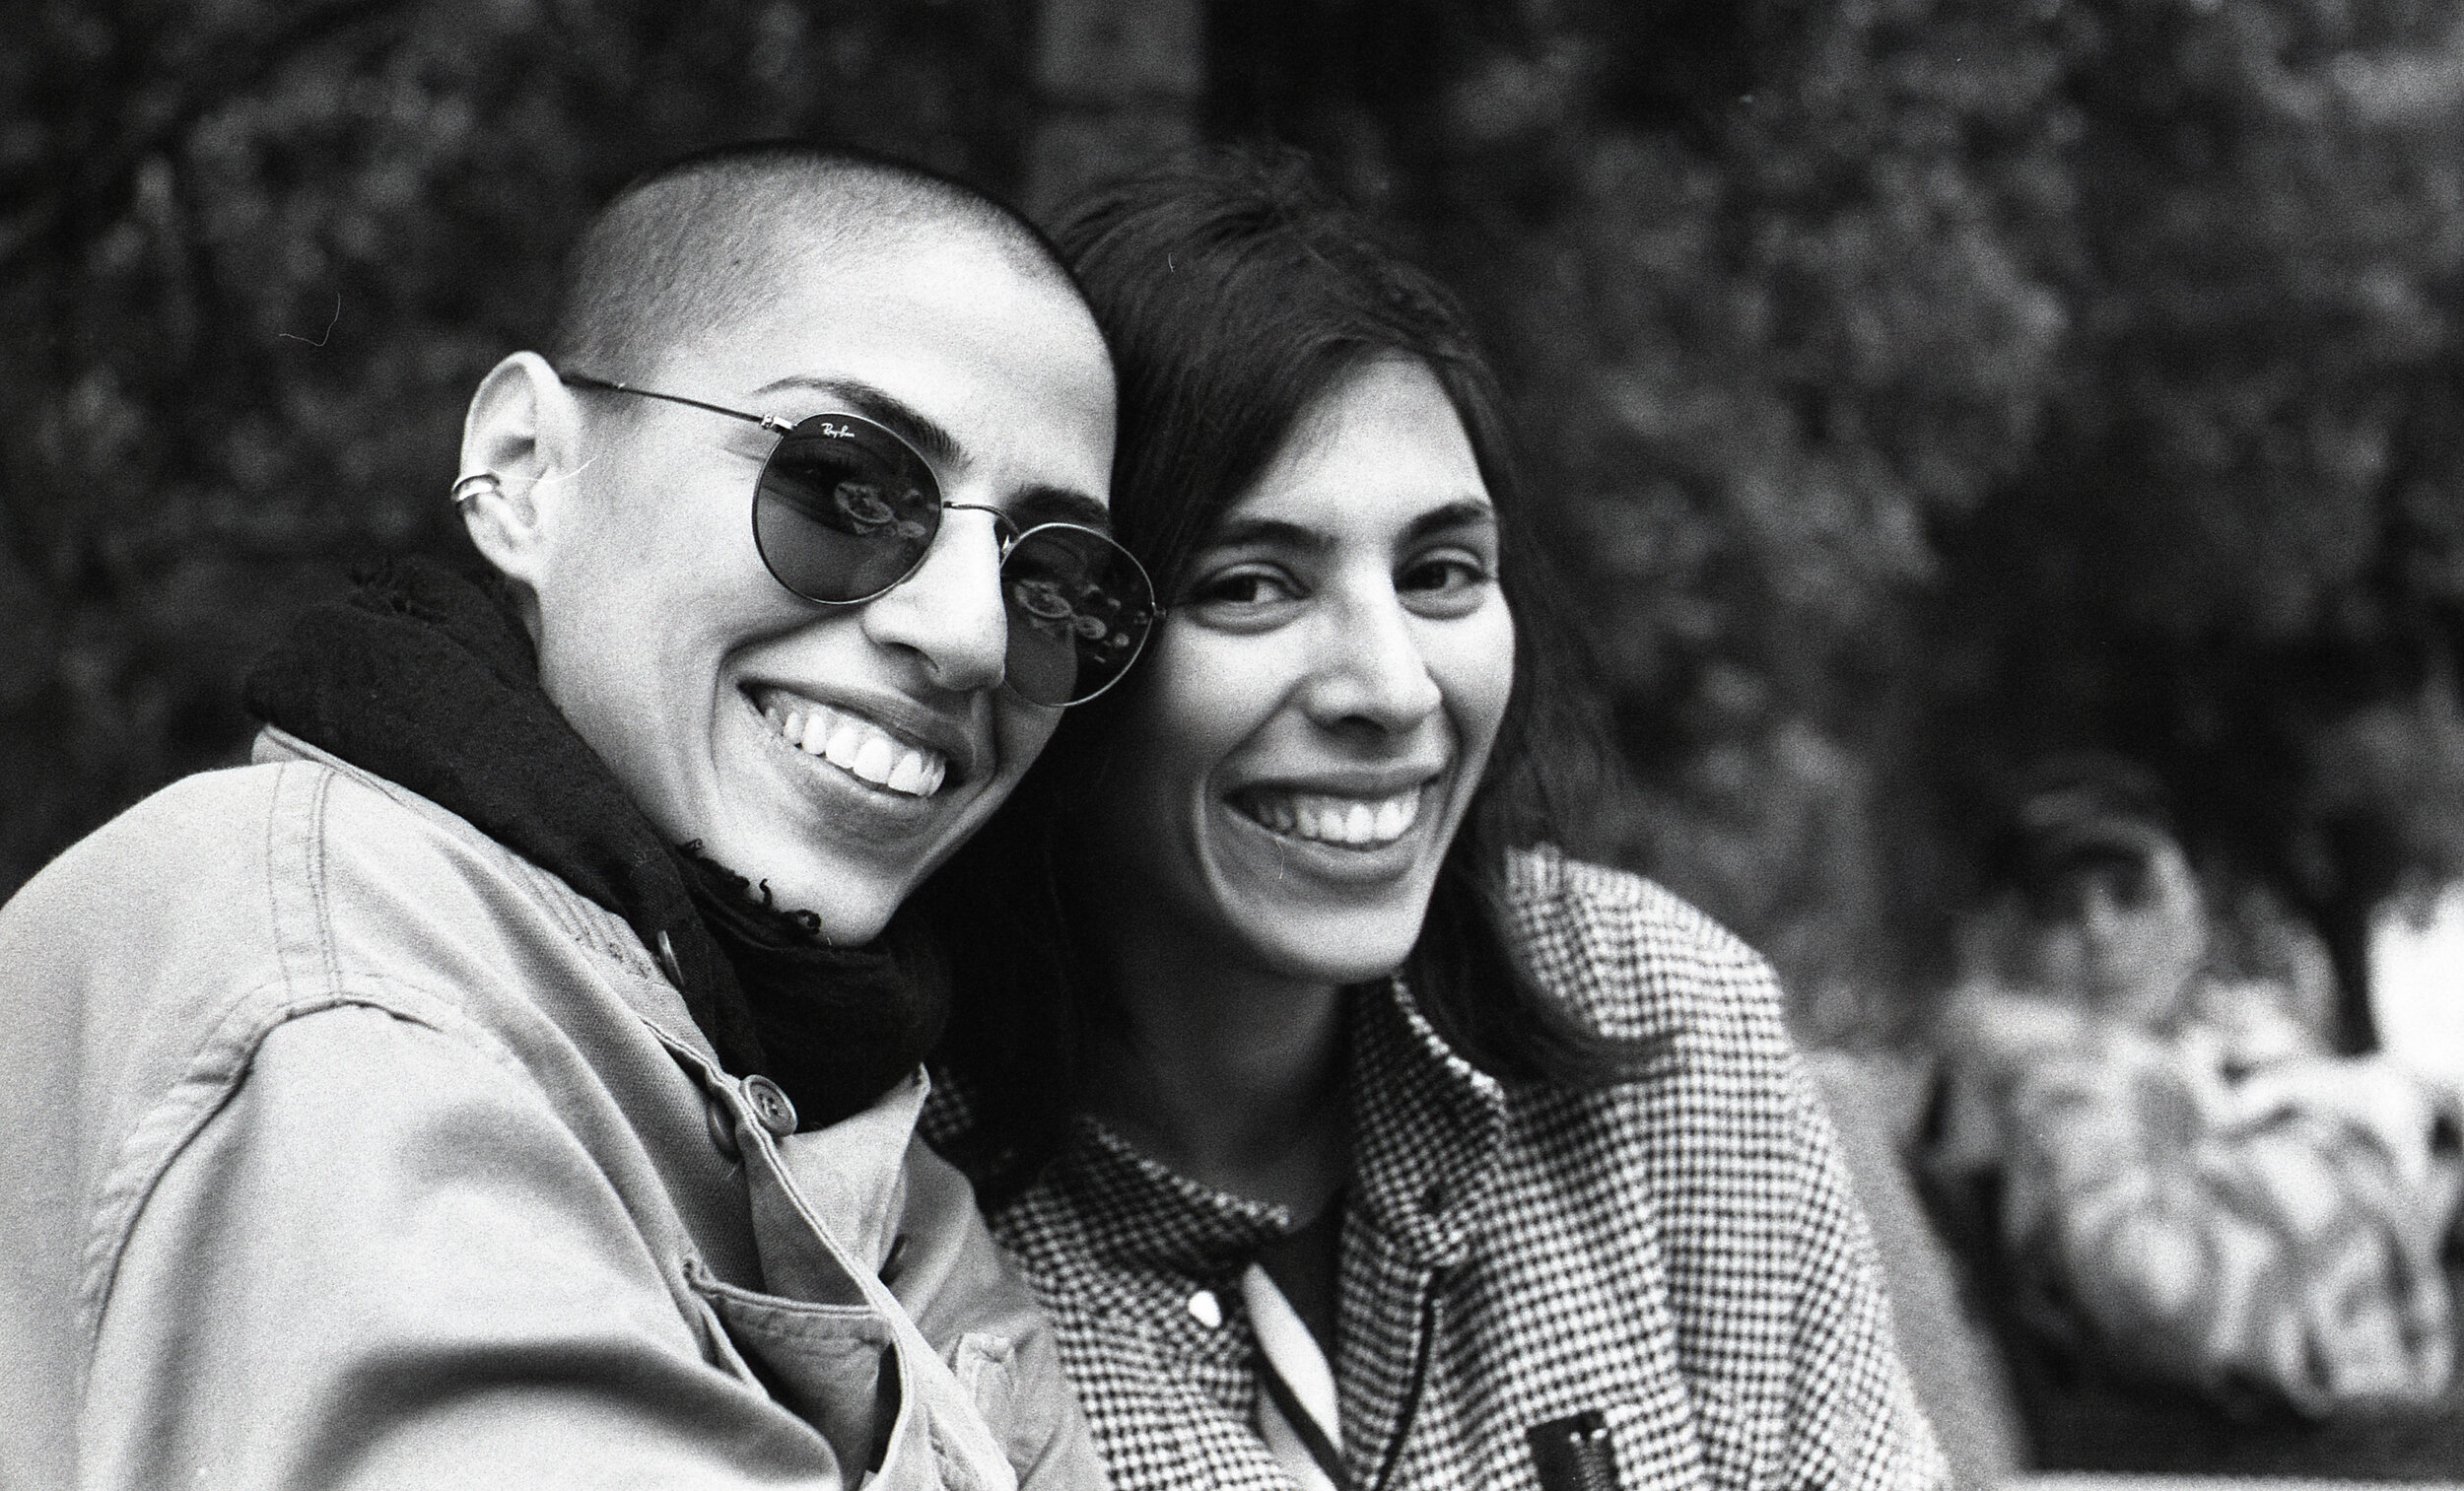 Me and my sister Jinane, shot by Elie Khoury